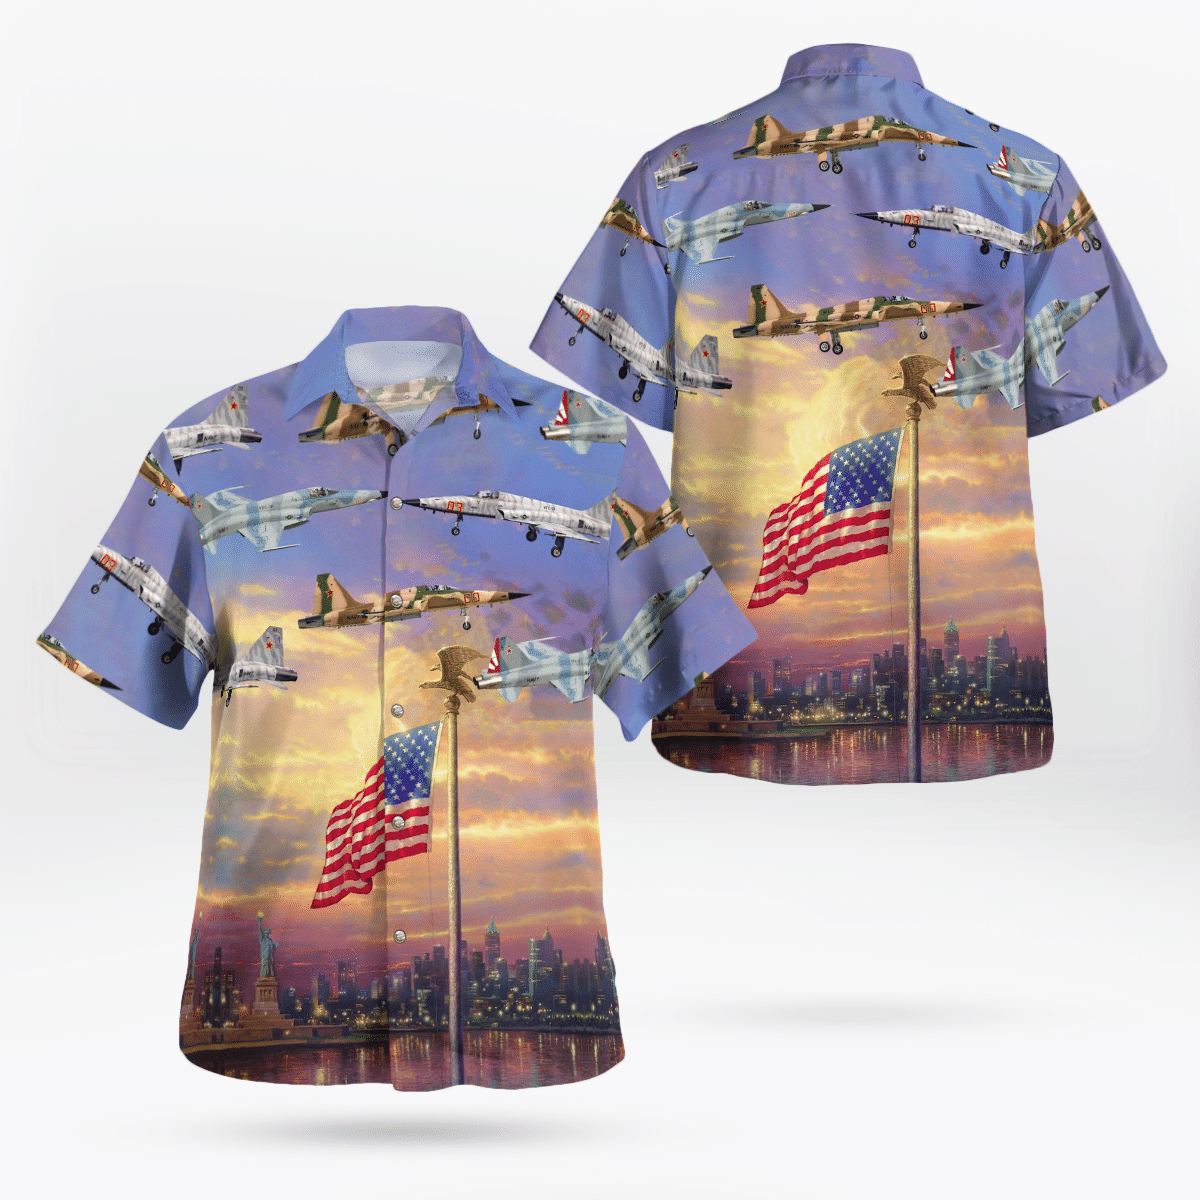 HOT US Navy Northrop F-5N Tiger Independence Day The Statue of Liberty Hawaii Shirt 1